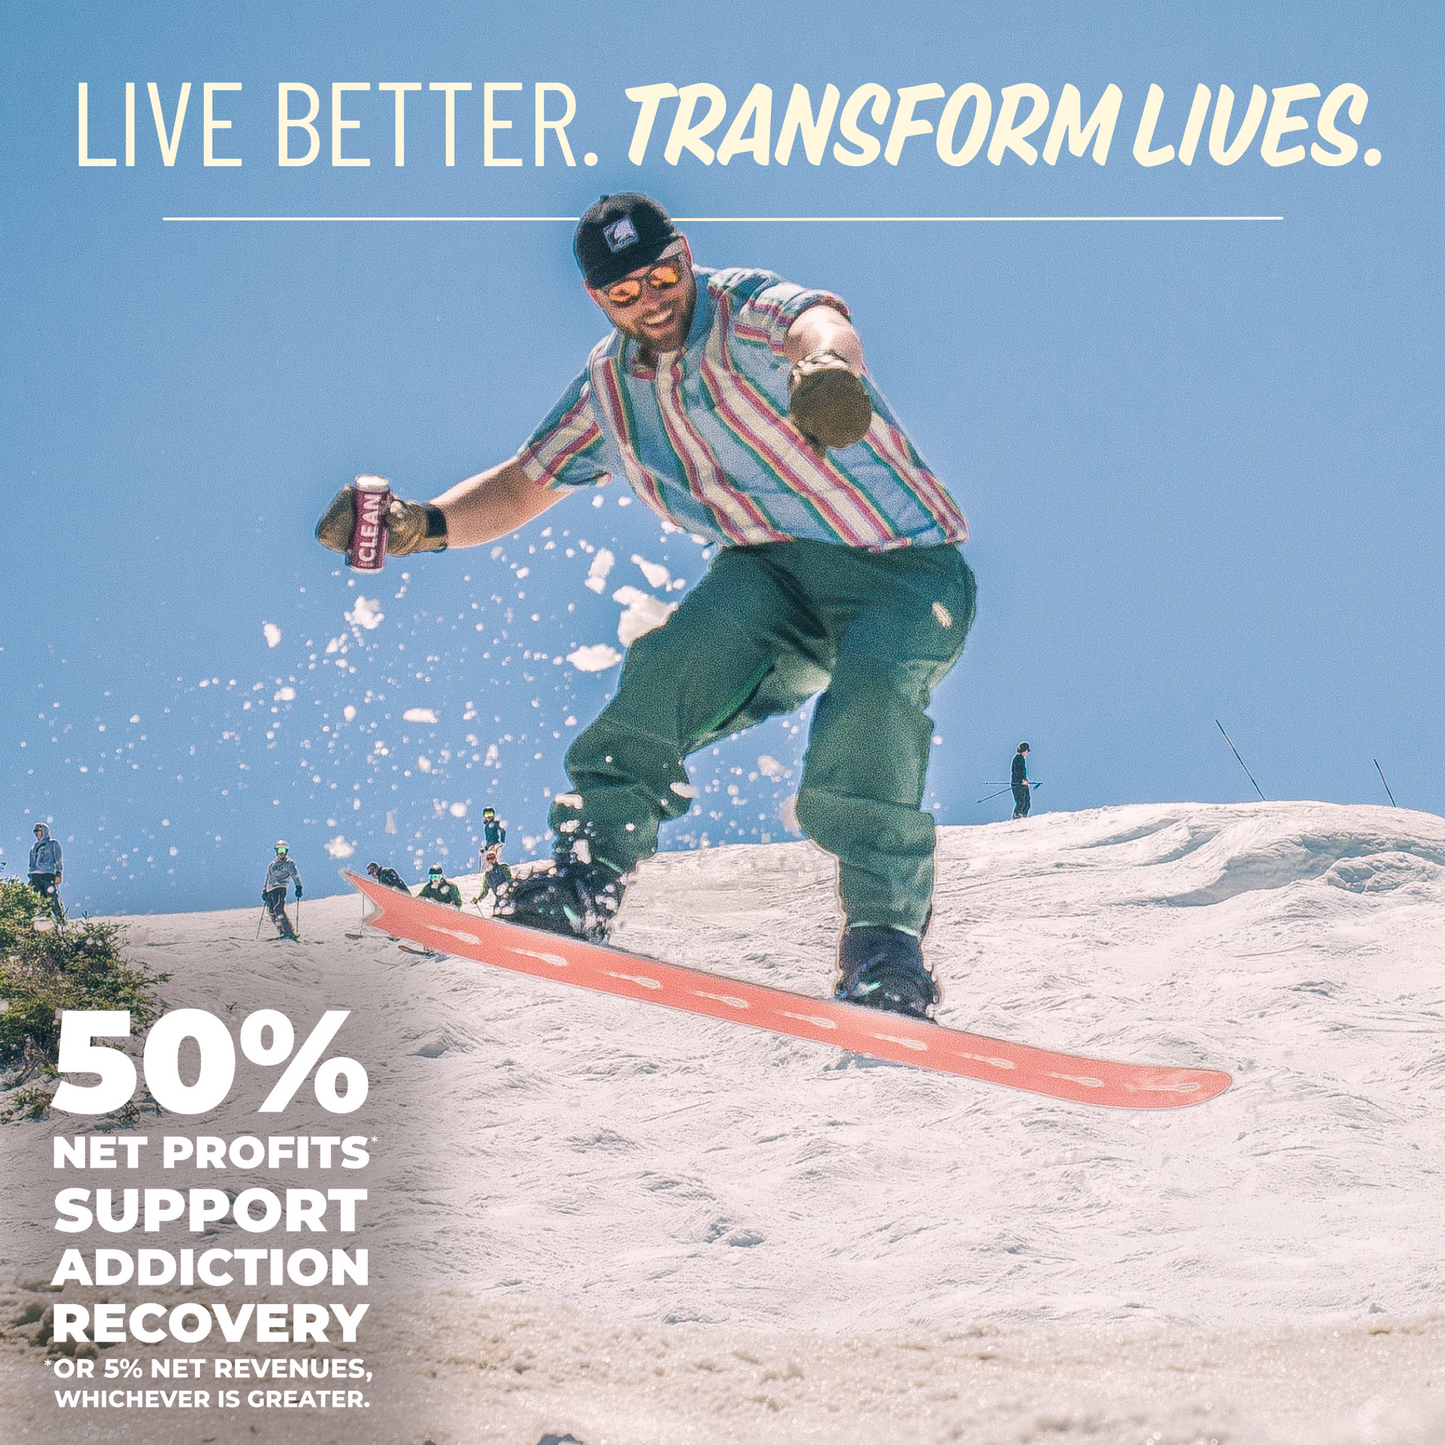 A man snowboarding holding a can of Blackberry CLEAN Cause Yerba Mate with the slogan Live Better. Transform Lives. above her and 50% Net profits* support addiction recovery *or 5% net revenues, whichever is greater